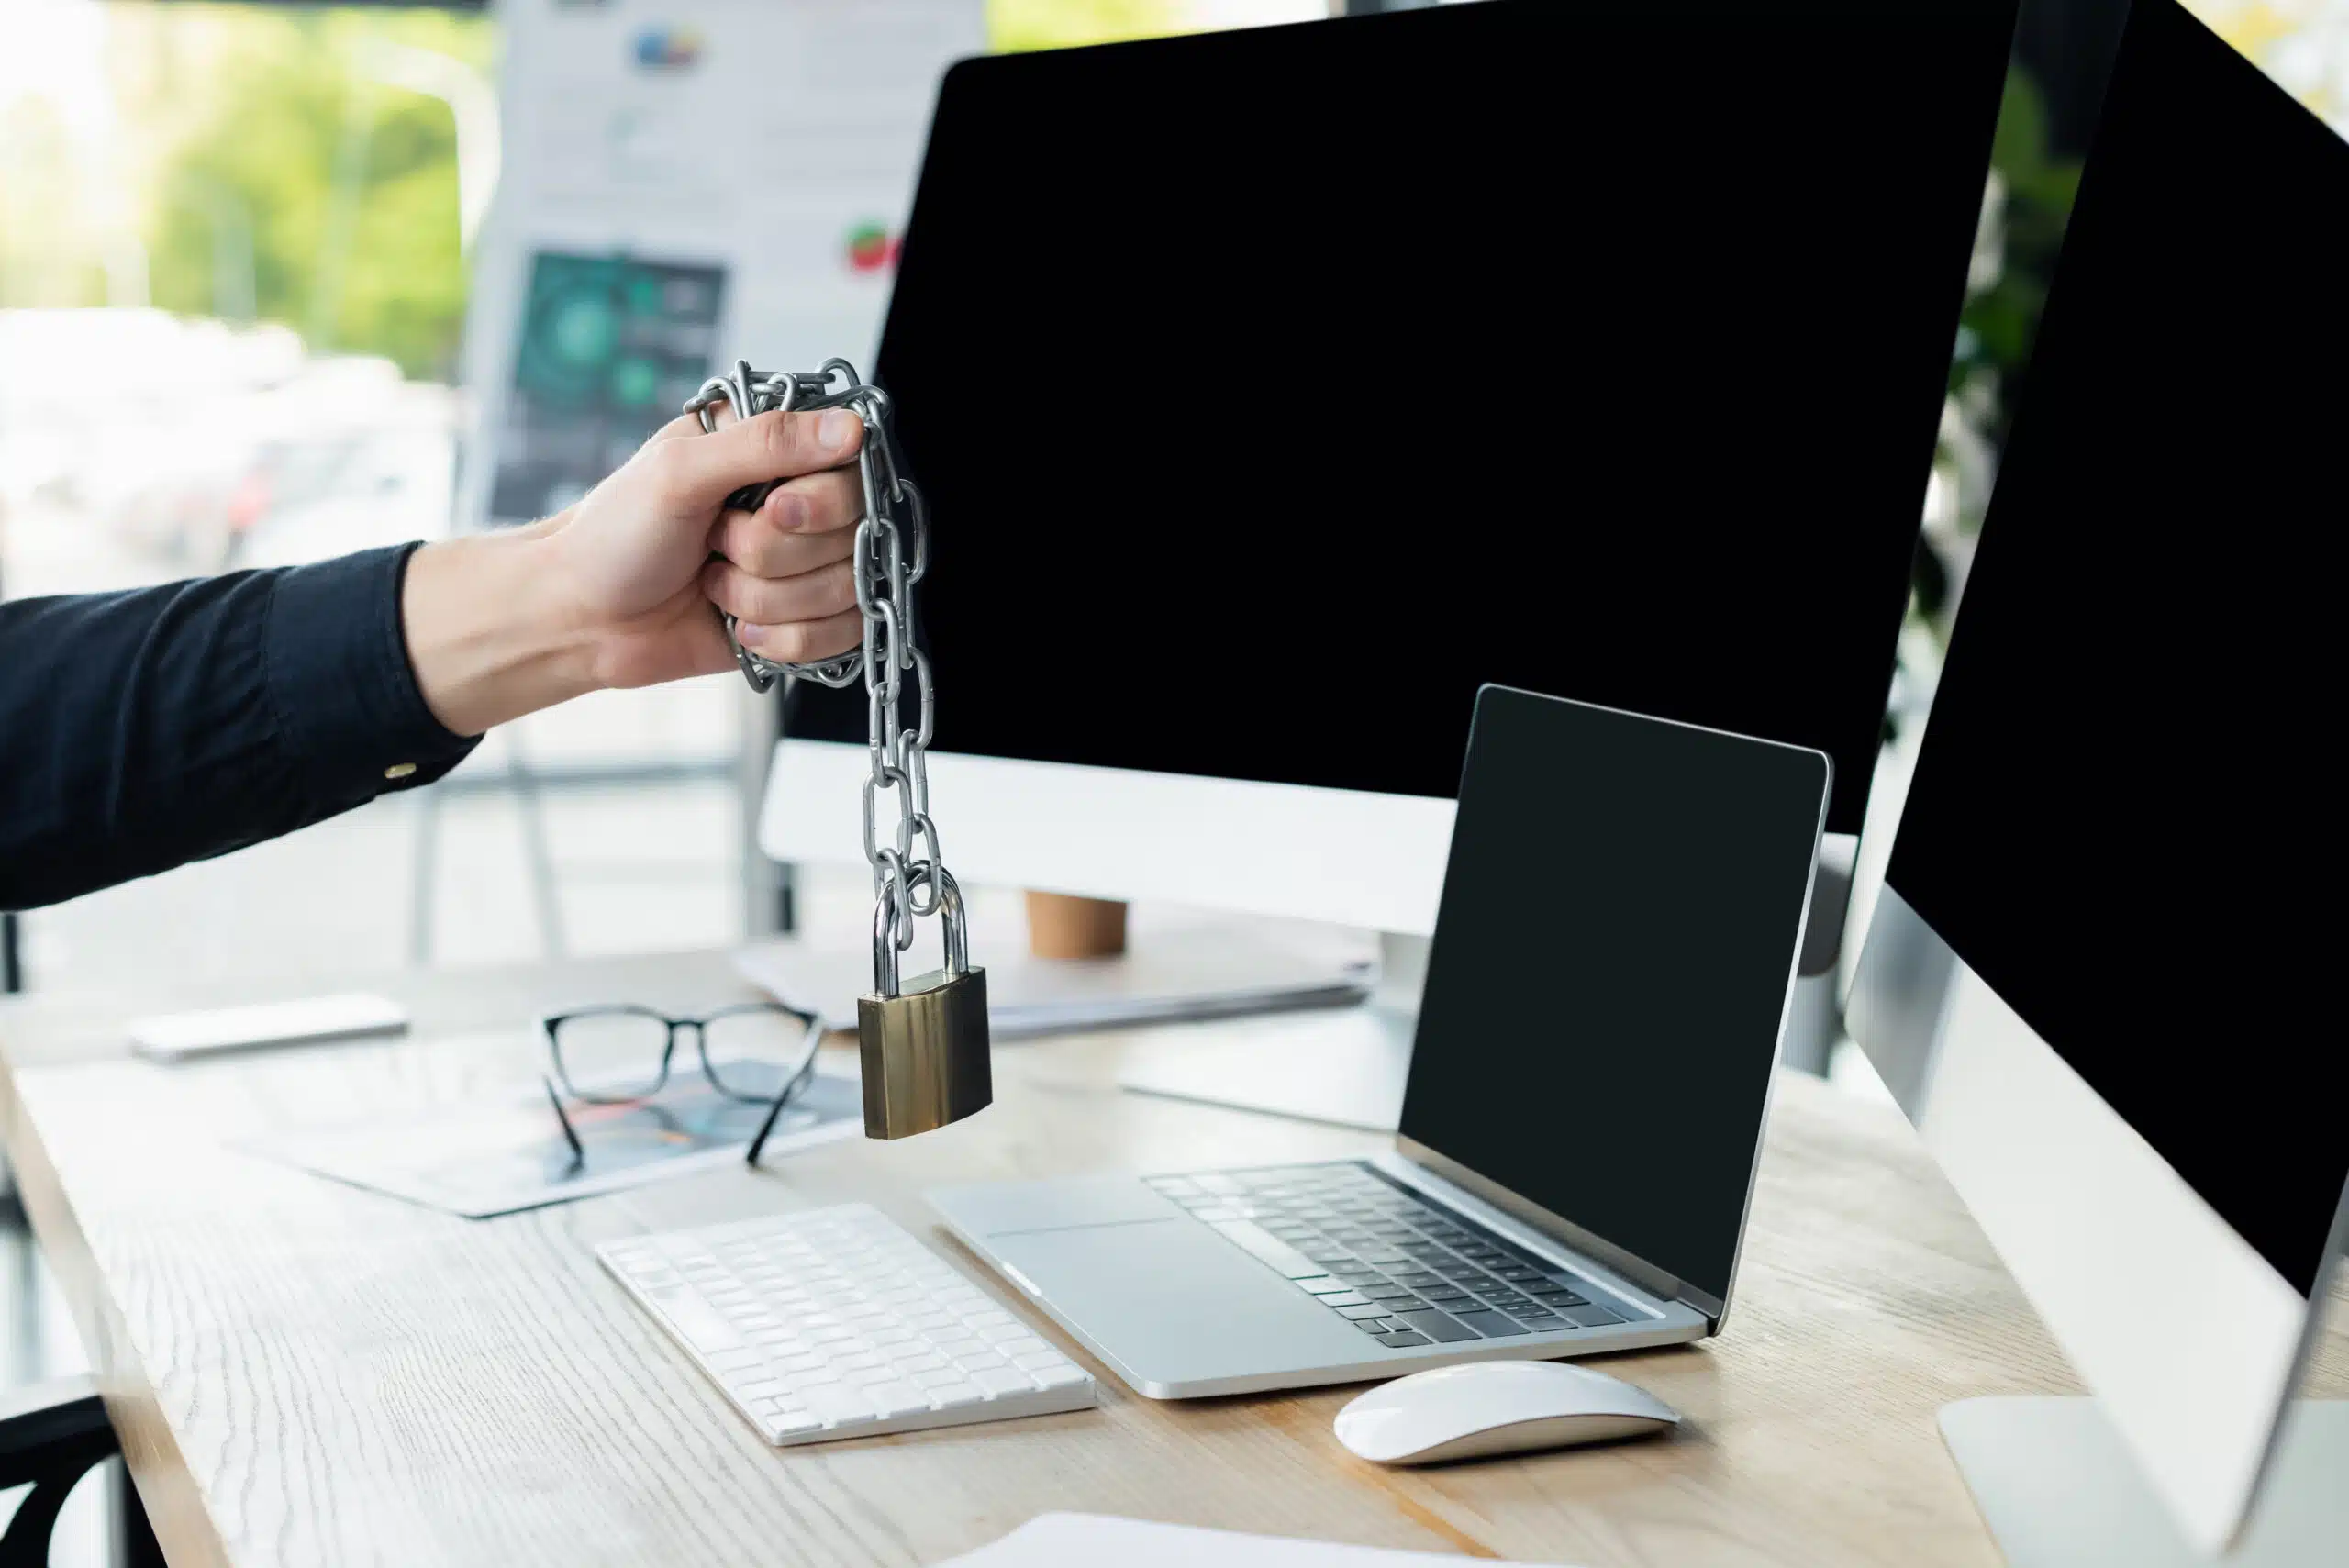 Cropped view of programmer holding padlock on chain near computers with blank screen in office